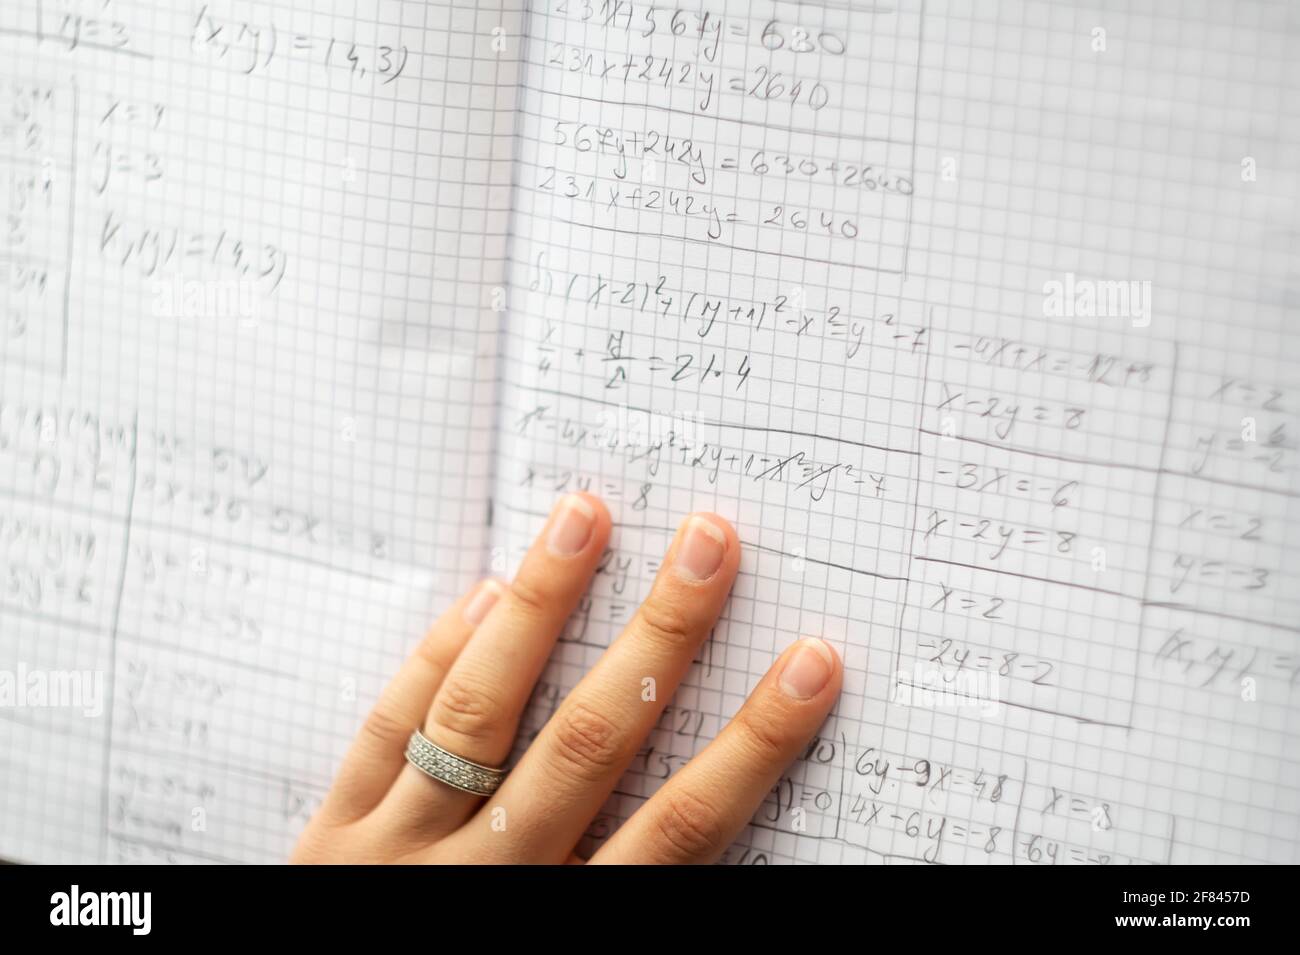 Solving system of equations., close up photo Stock Photo